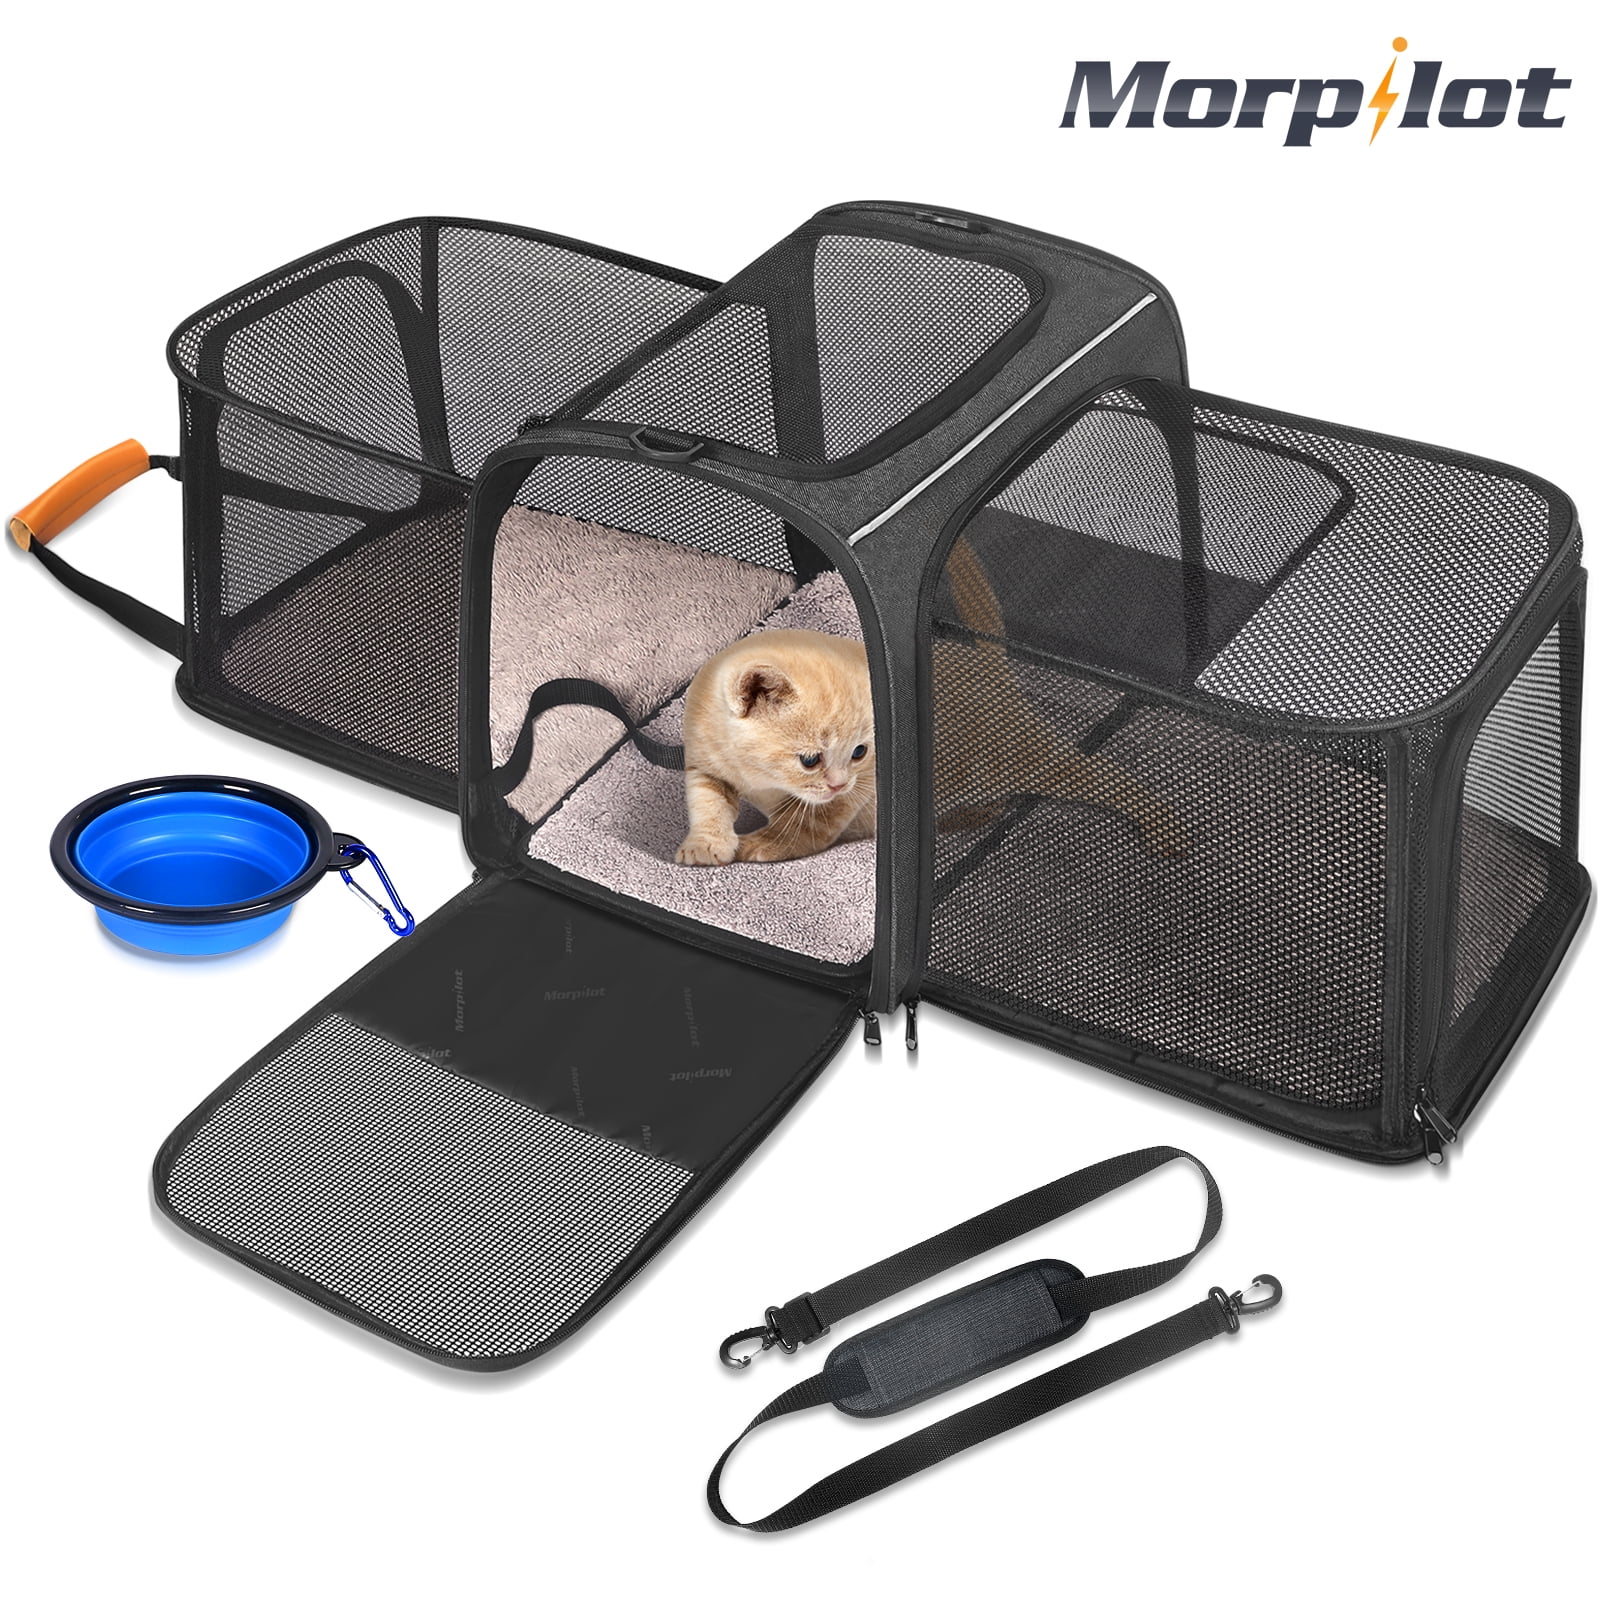 Expandable Pet Carrier wit Portable Folding Bowl, Morpilot Airline Approved Pet  Carrier, 2 Sides Expandable Soft Cat Carrier with Fleece Pad for two lower  than 15lb Cats, Dogs, Puppy and Small Animals 